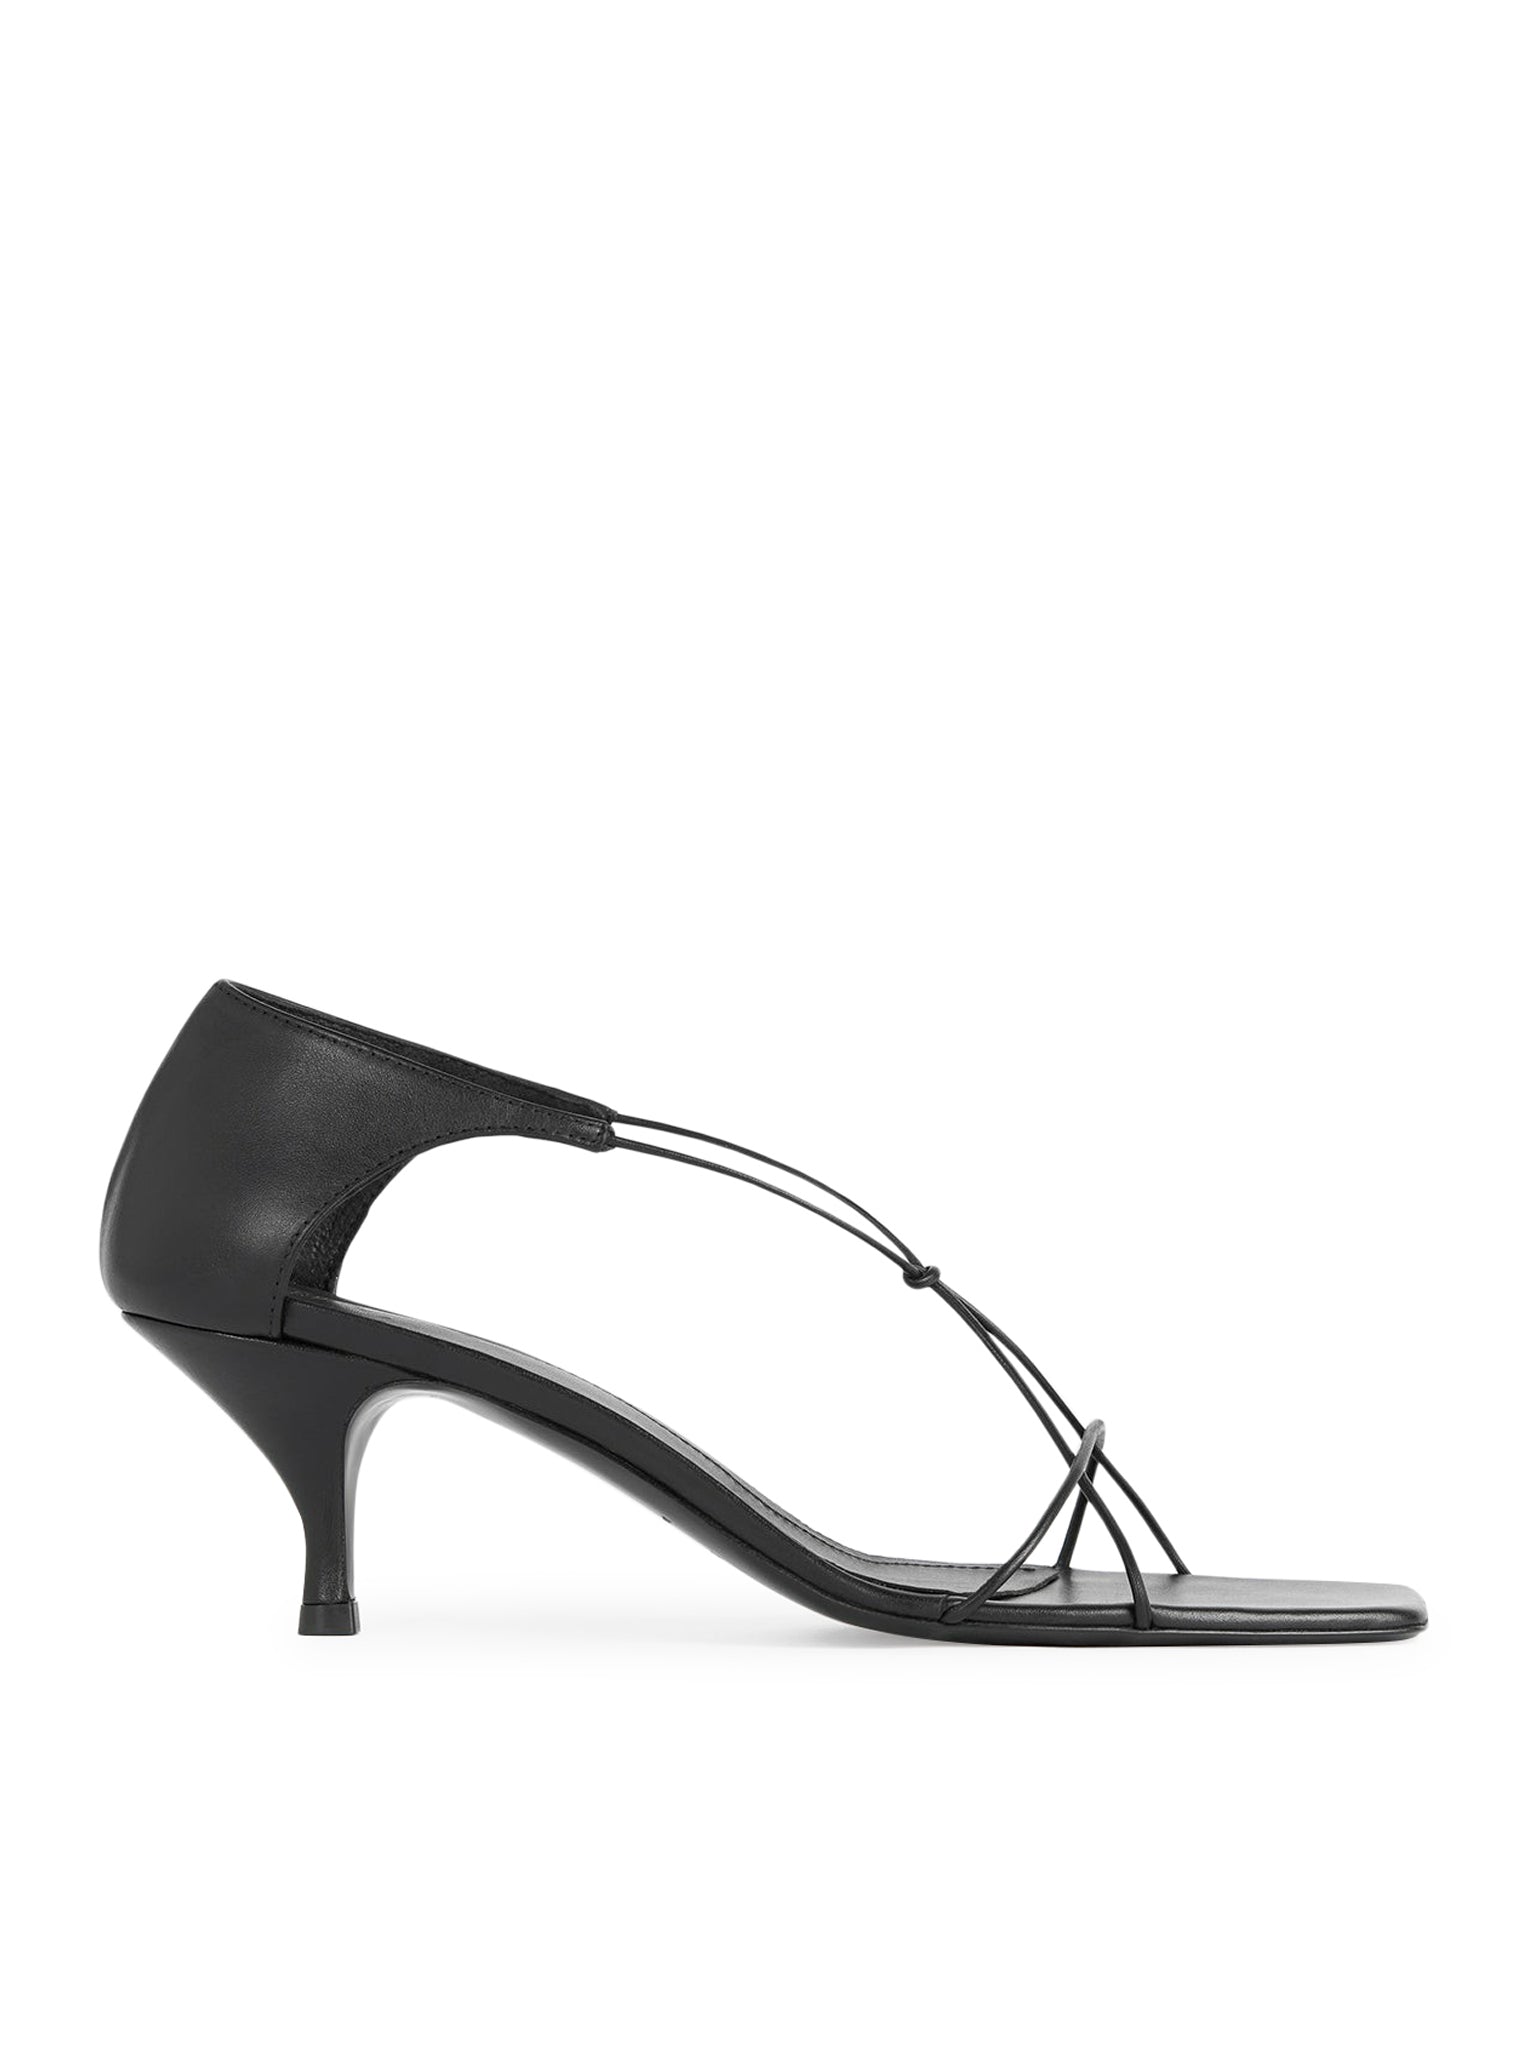 The Leather Knot Sandal black